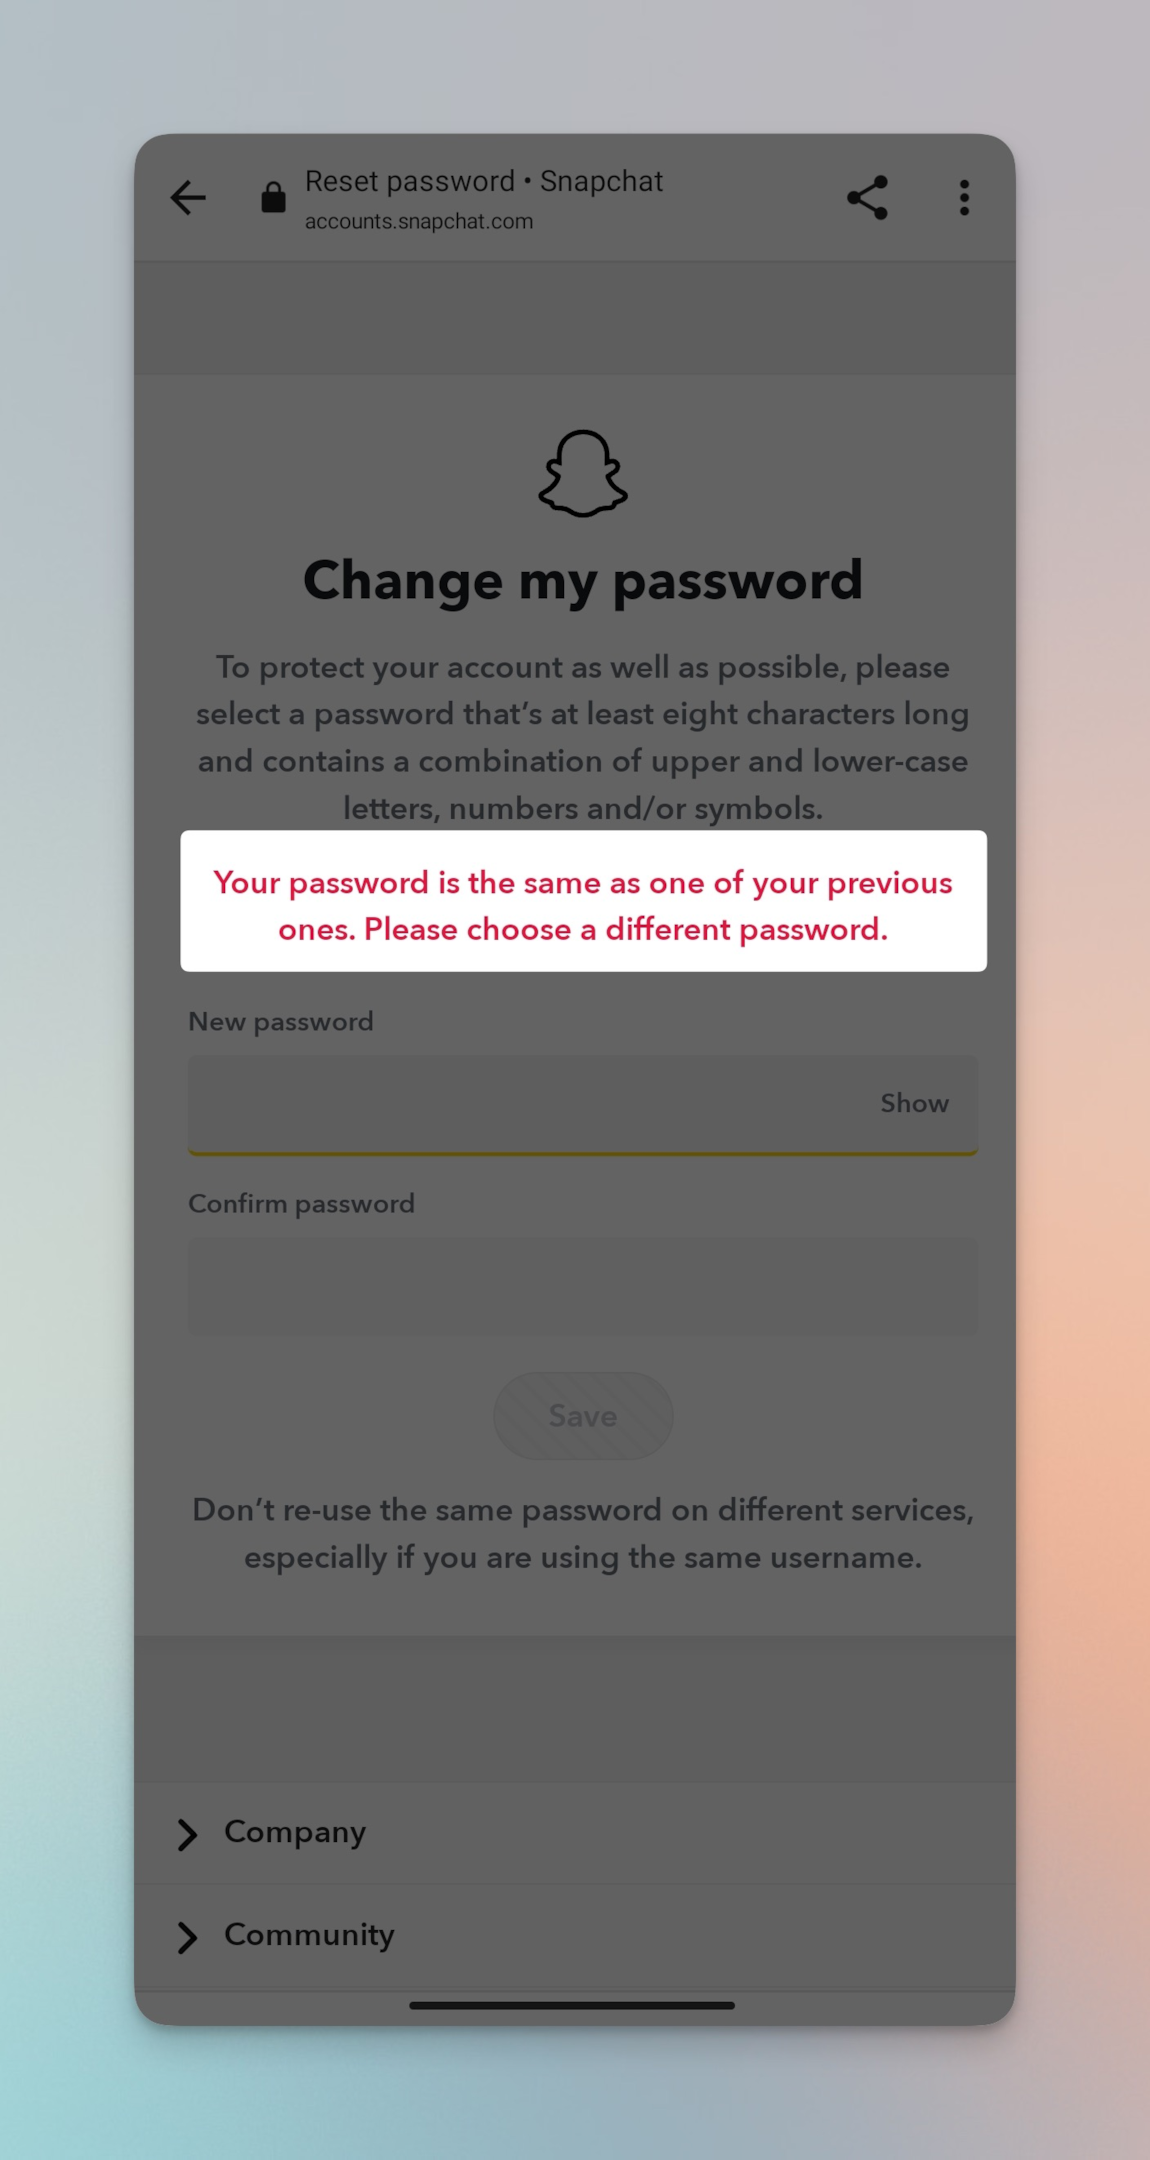 Remote.tools highlighting the warning messages that Snapchat shows if you enter a password that was previously used for your Snapchat account. This is to fix Oops! We could not find matching credentials.